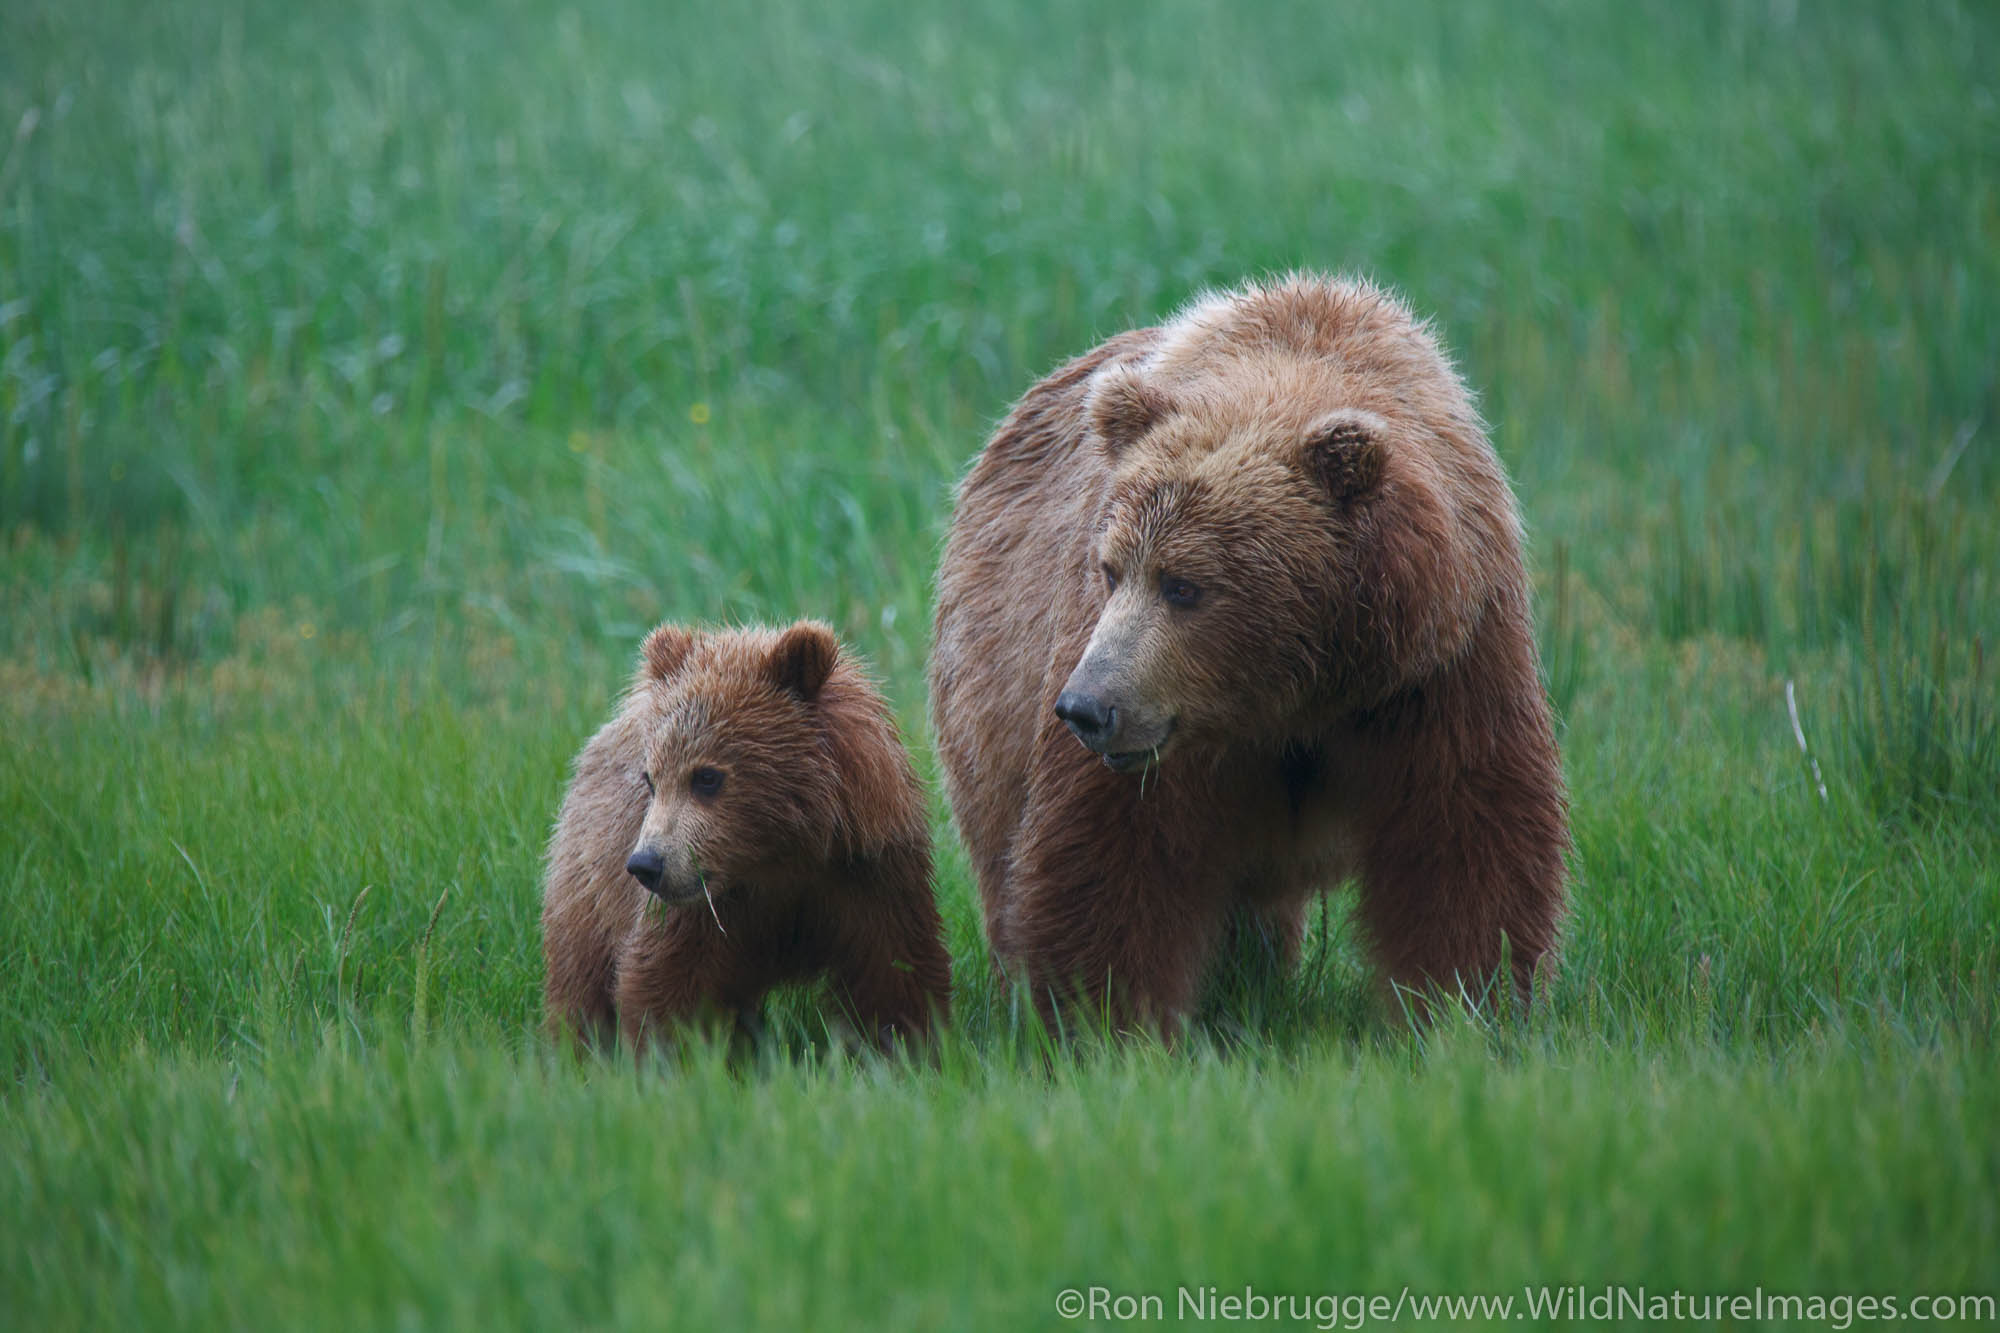 A Brown or Grizzly Bear sow with cub, Lake Clark National Park, Alaska.